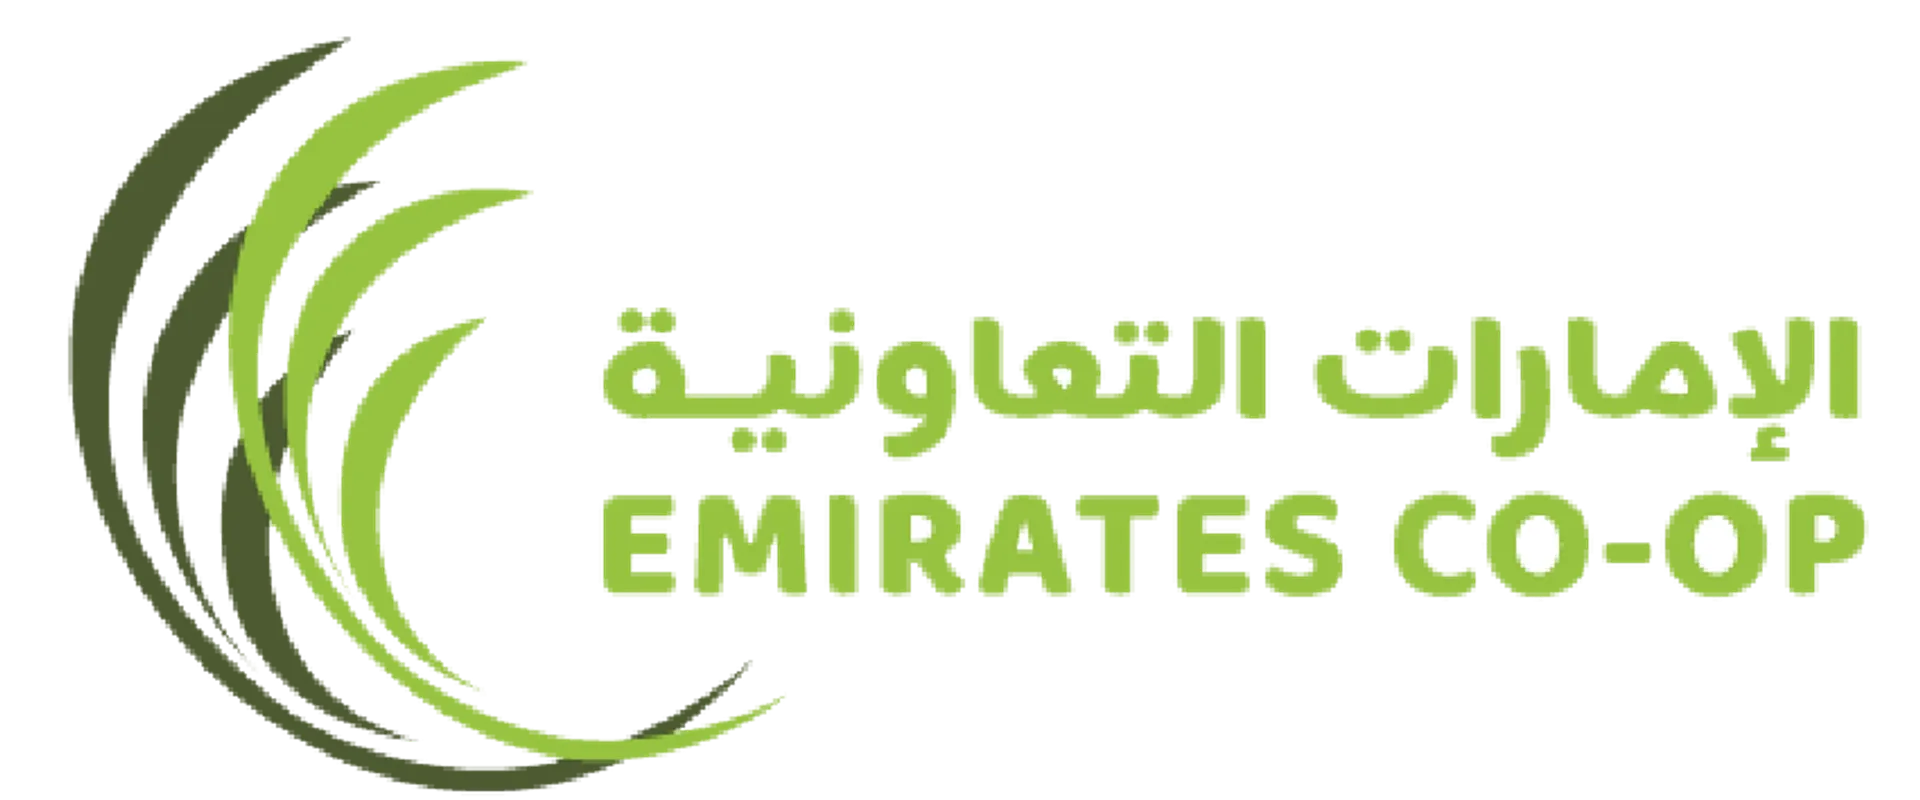 EMIRATES CO.OP logo. Current weekly ad